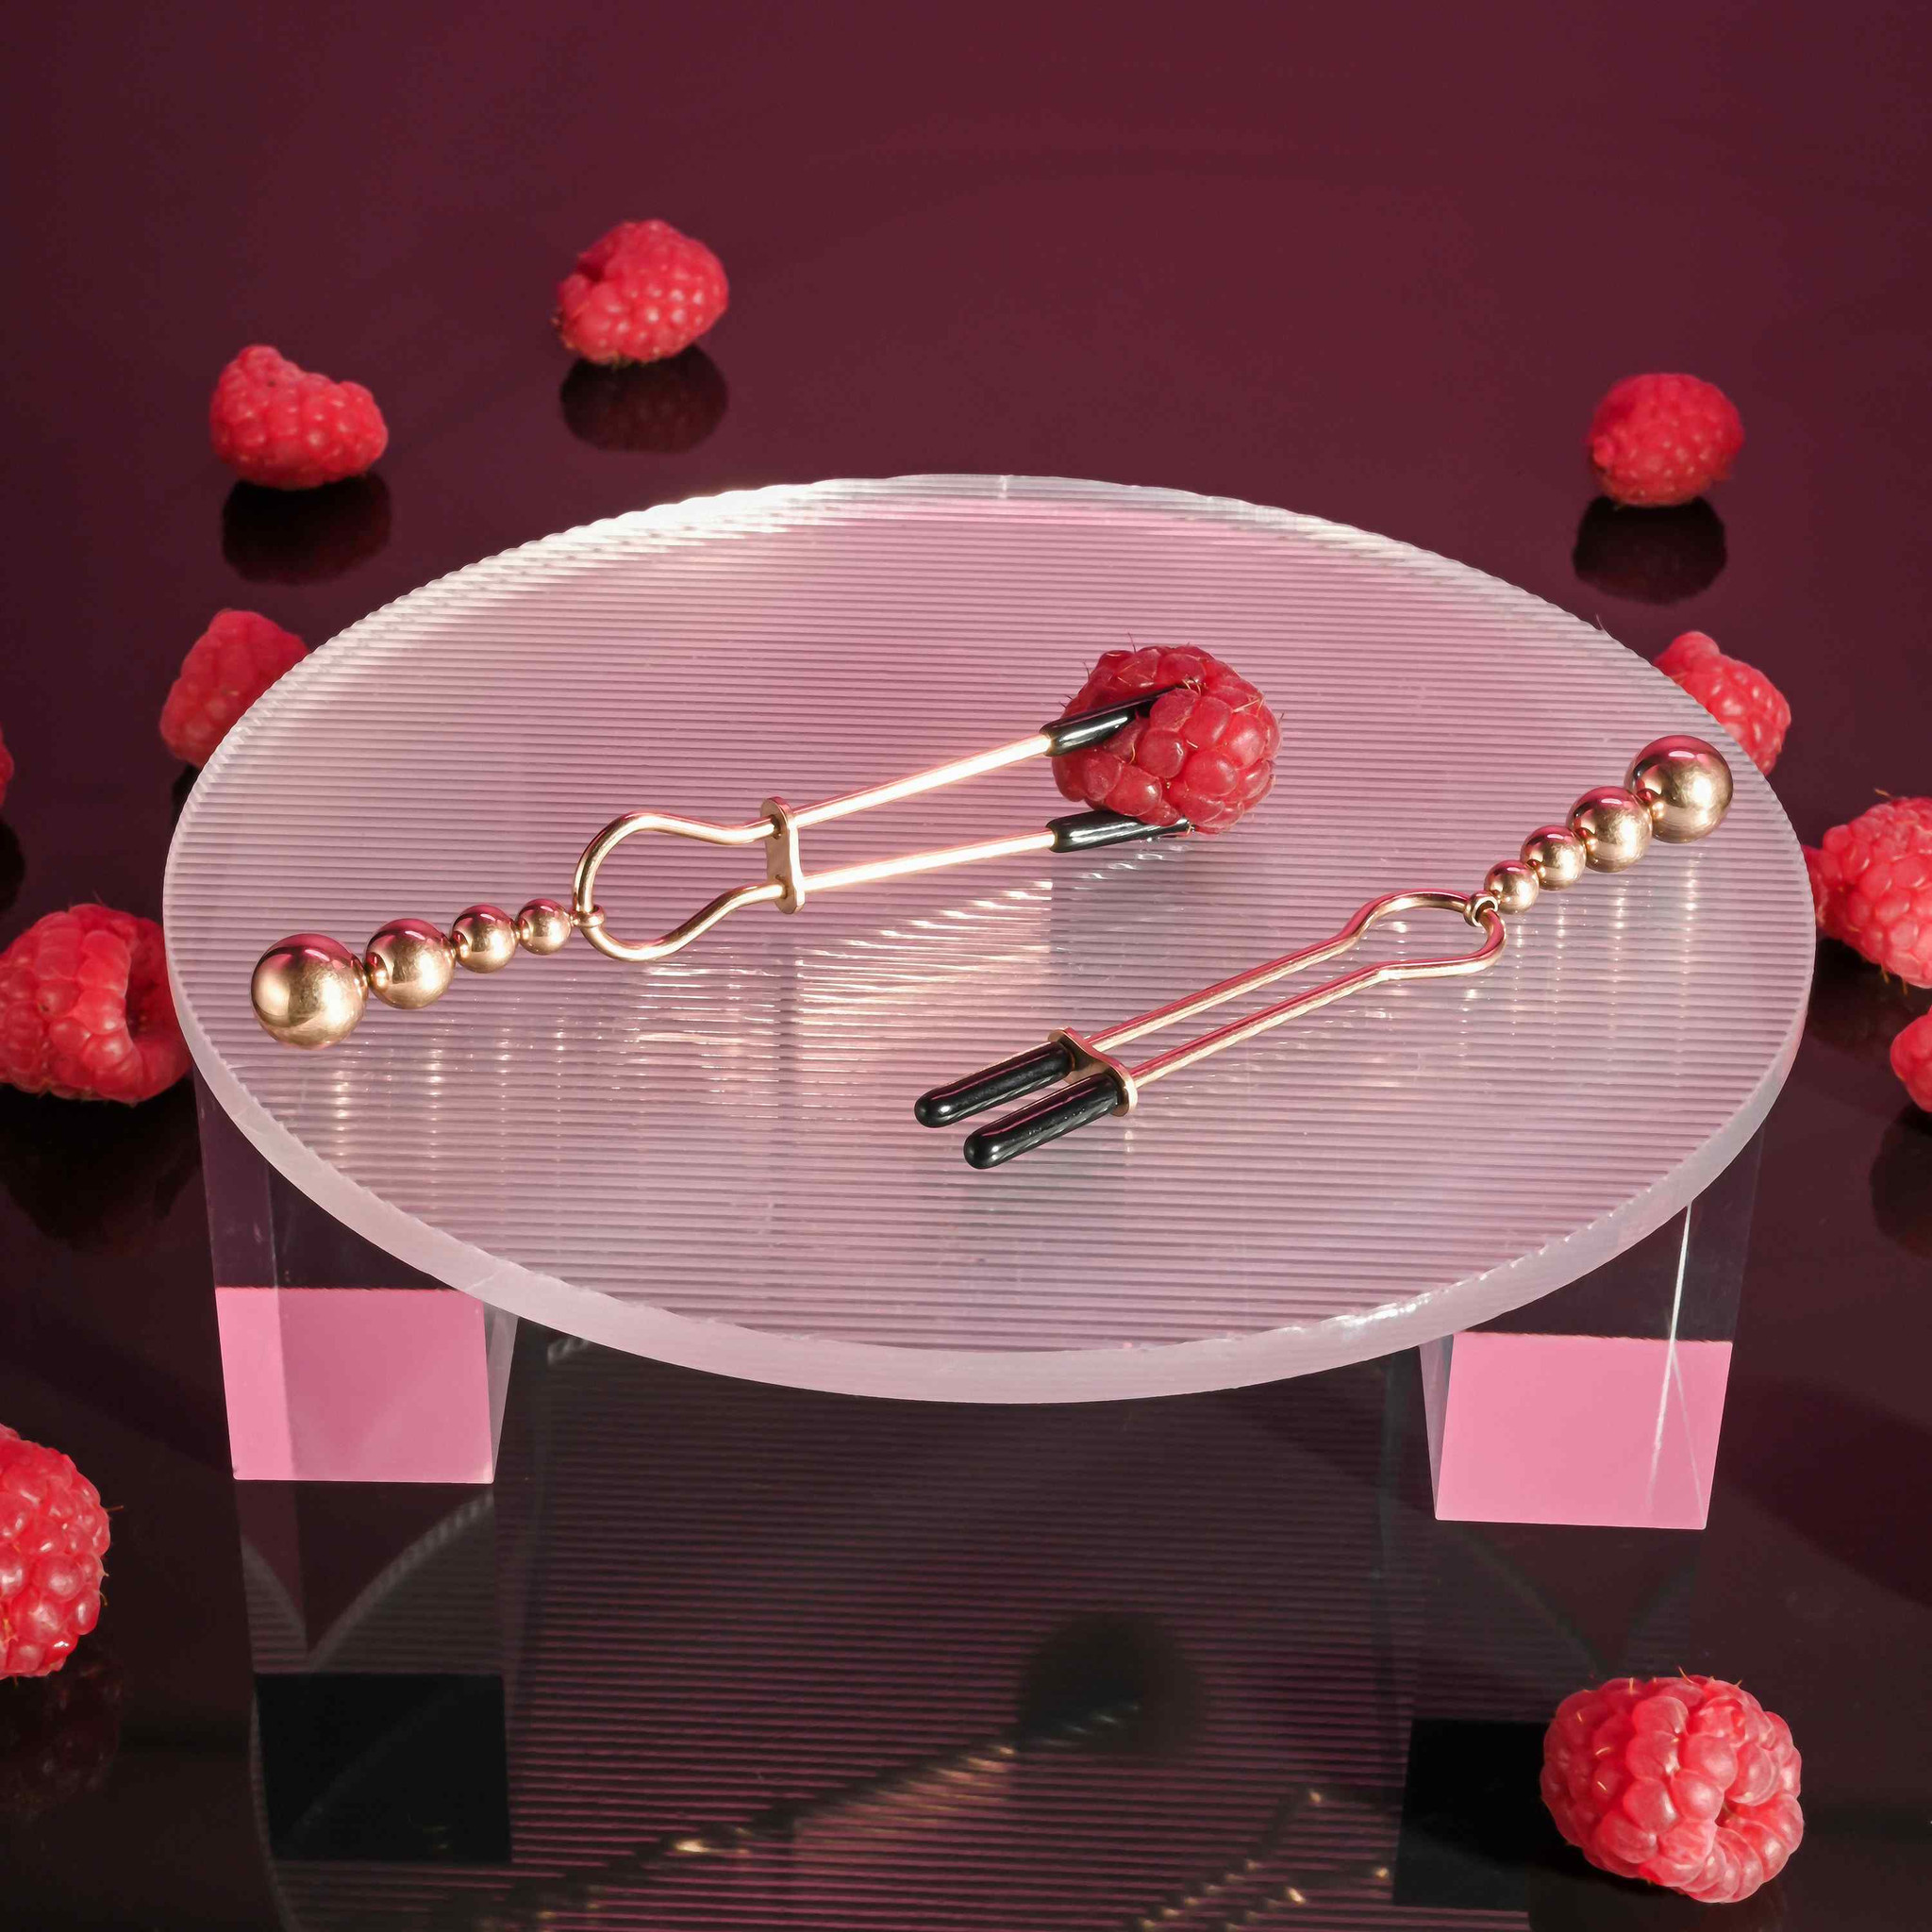 Couture Clips Golden Harvest Luxury Nipple Clamps